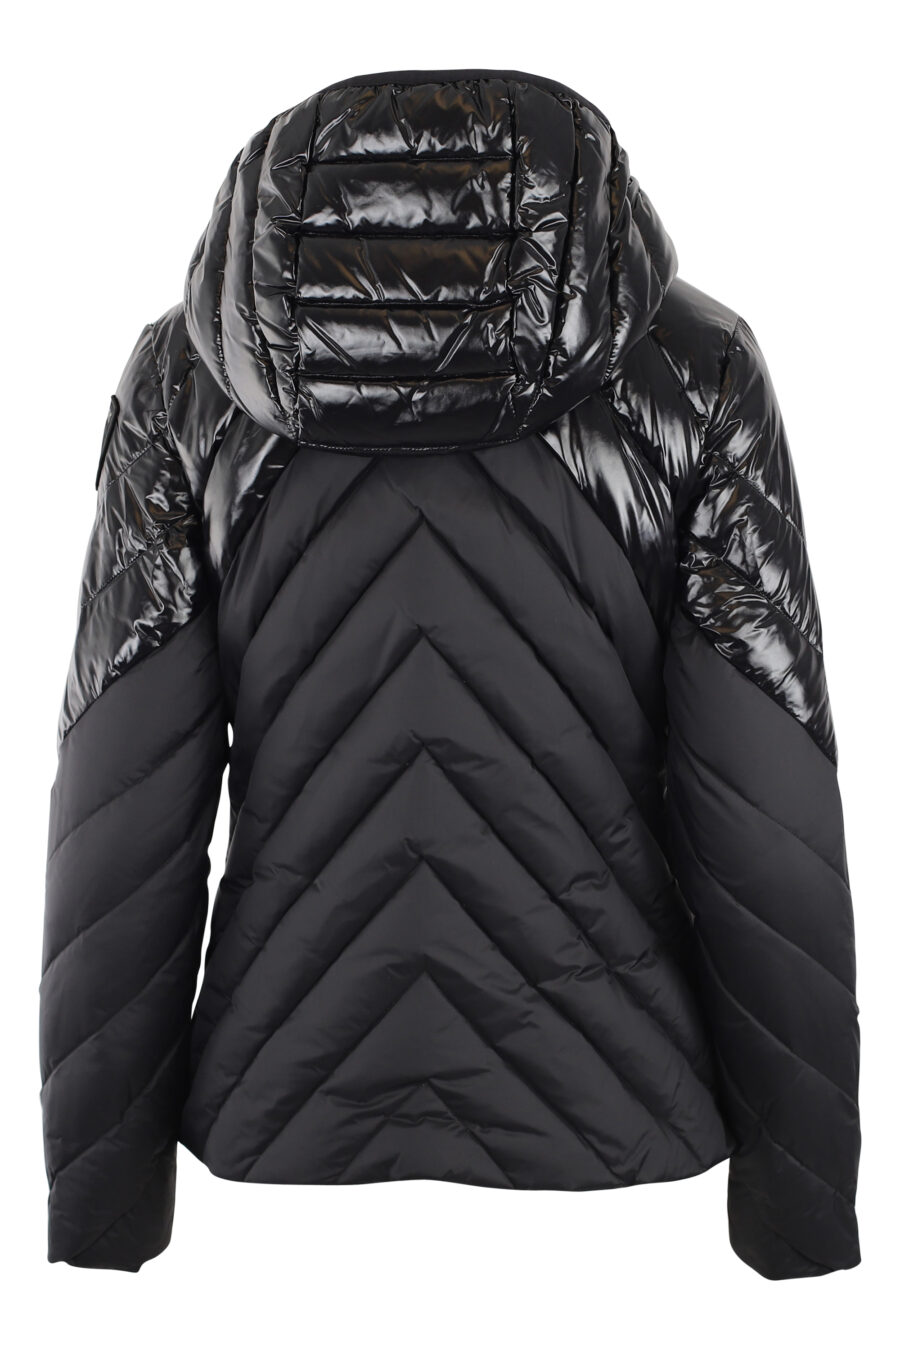 Black hooded jacket with diagonal lines - IMG 5476